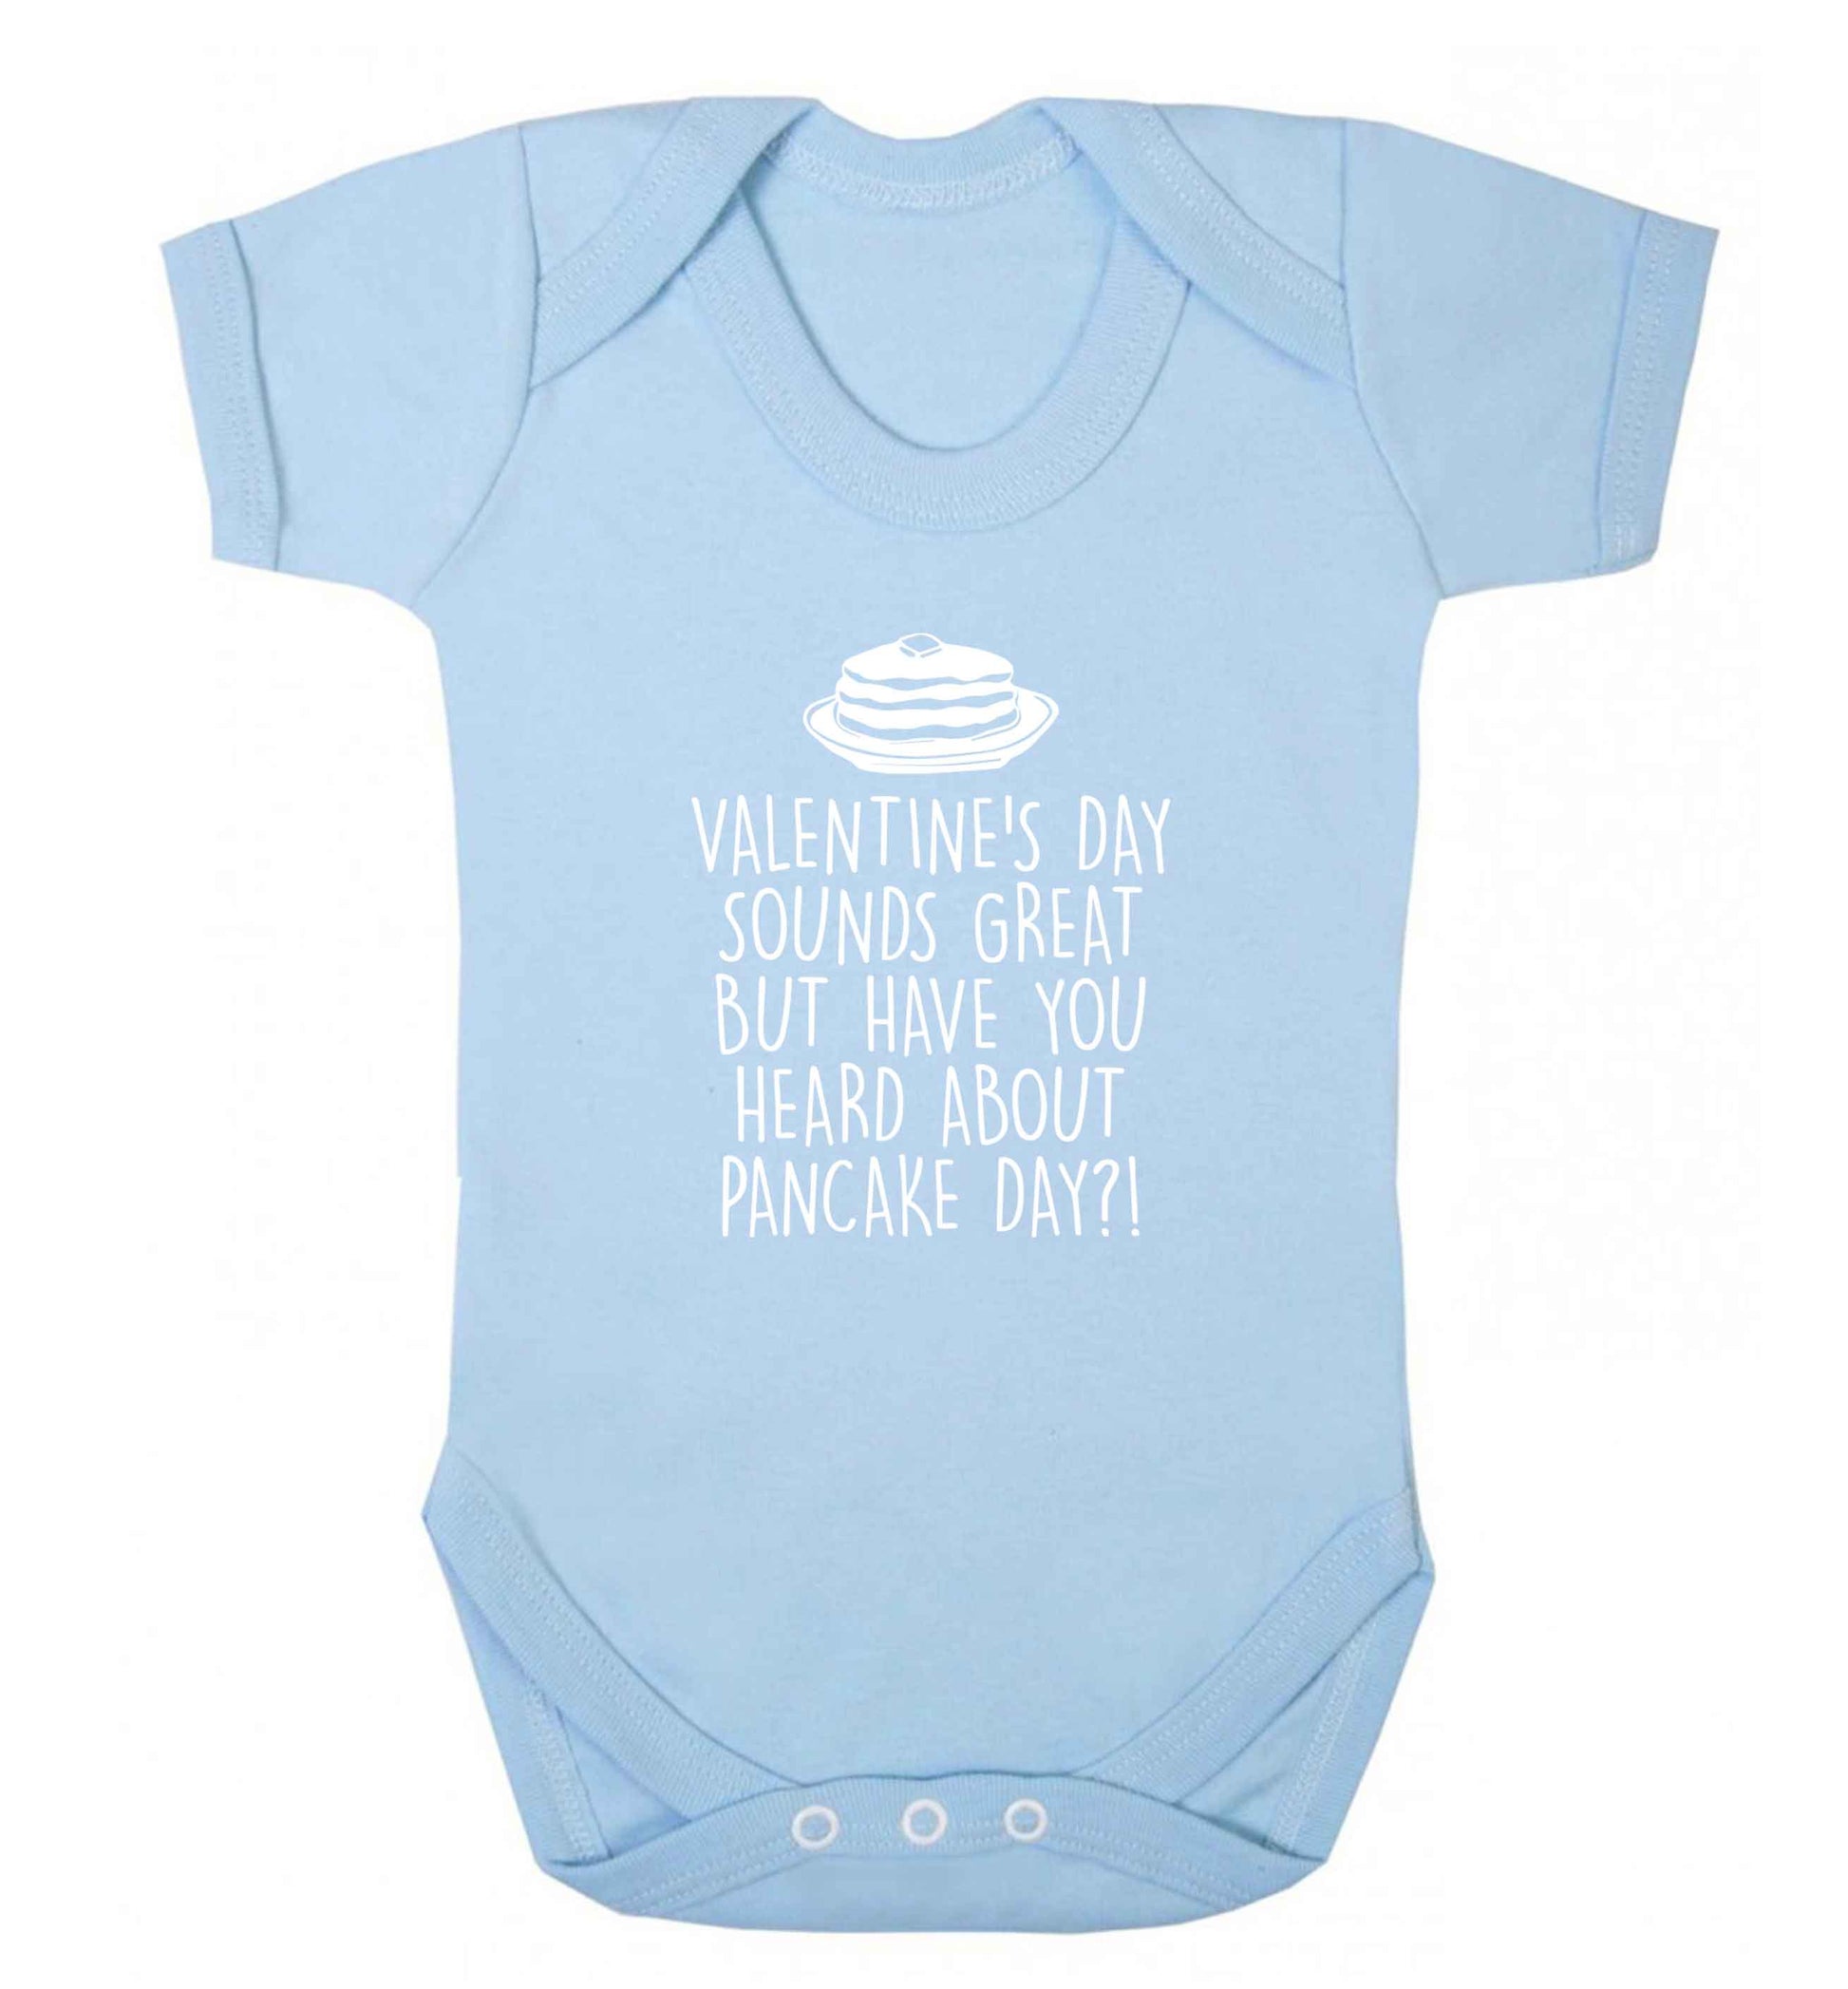 Valentine's day sounds great but have you heard about pancake day?! baby vest pale blue 18-24 months